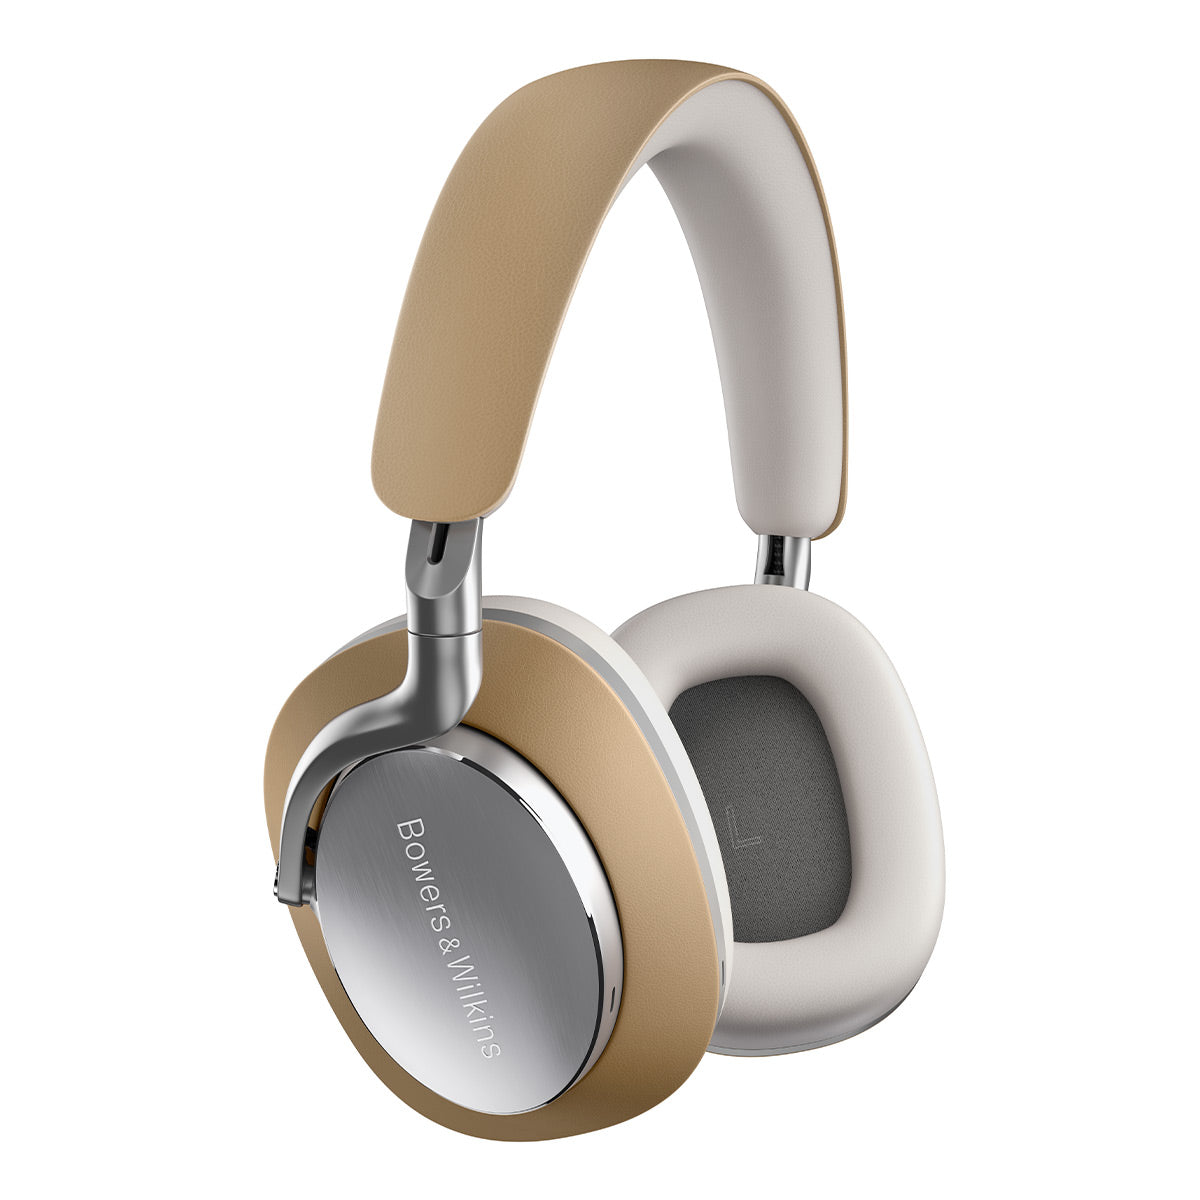 Bowers & Wilkins Px8 Wireless Bluetooth Over-Ear Headphones with Active Noise Cancellation (Tan)